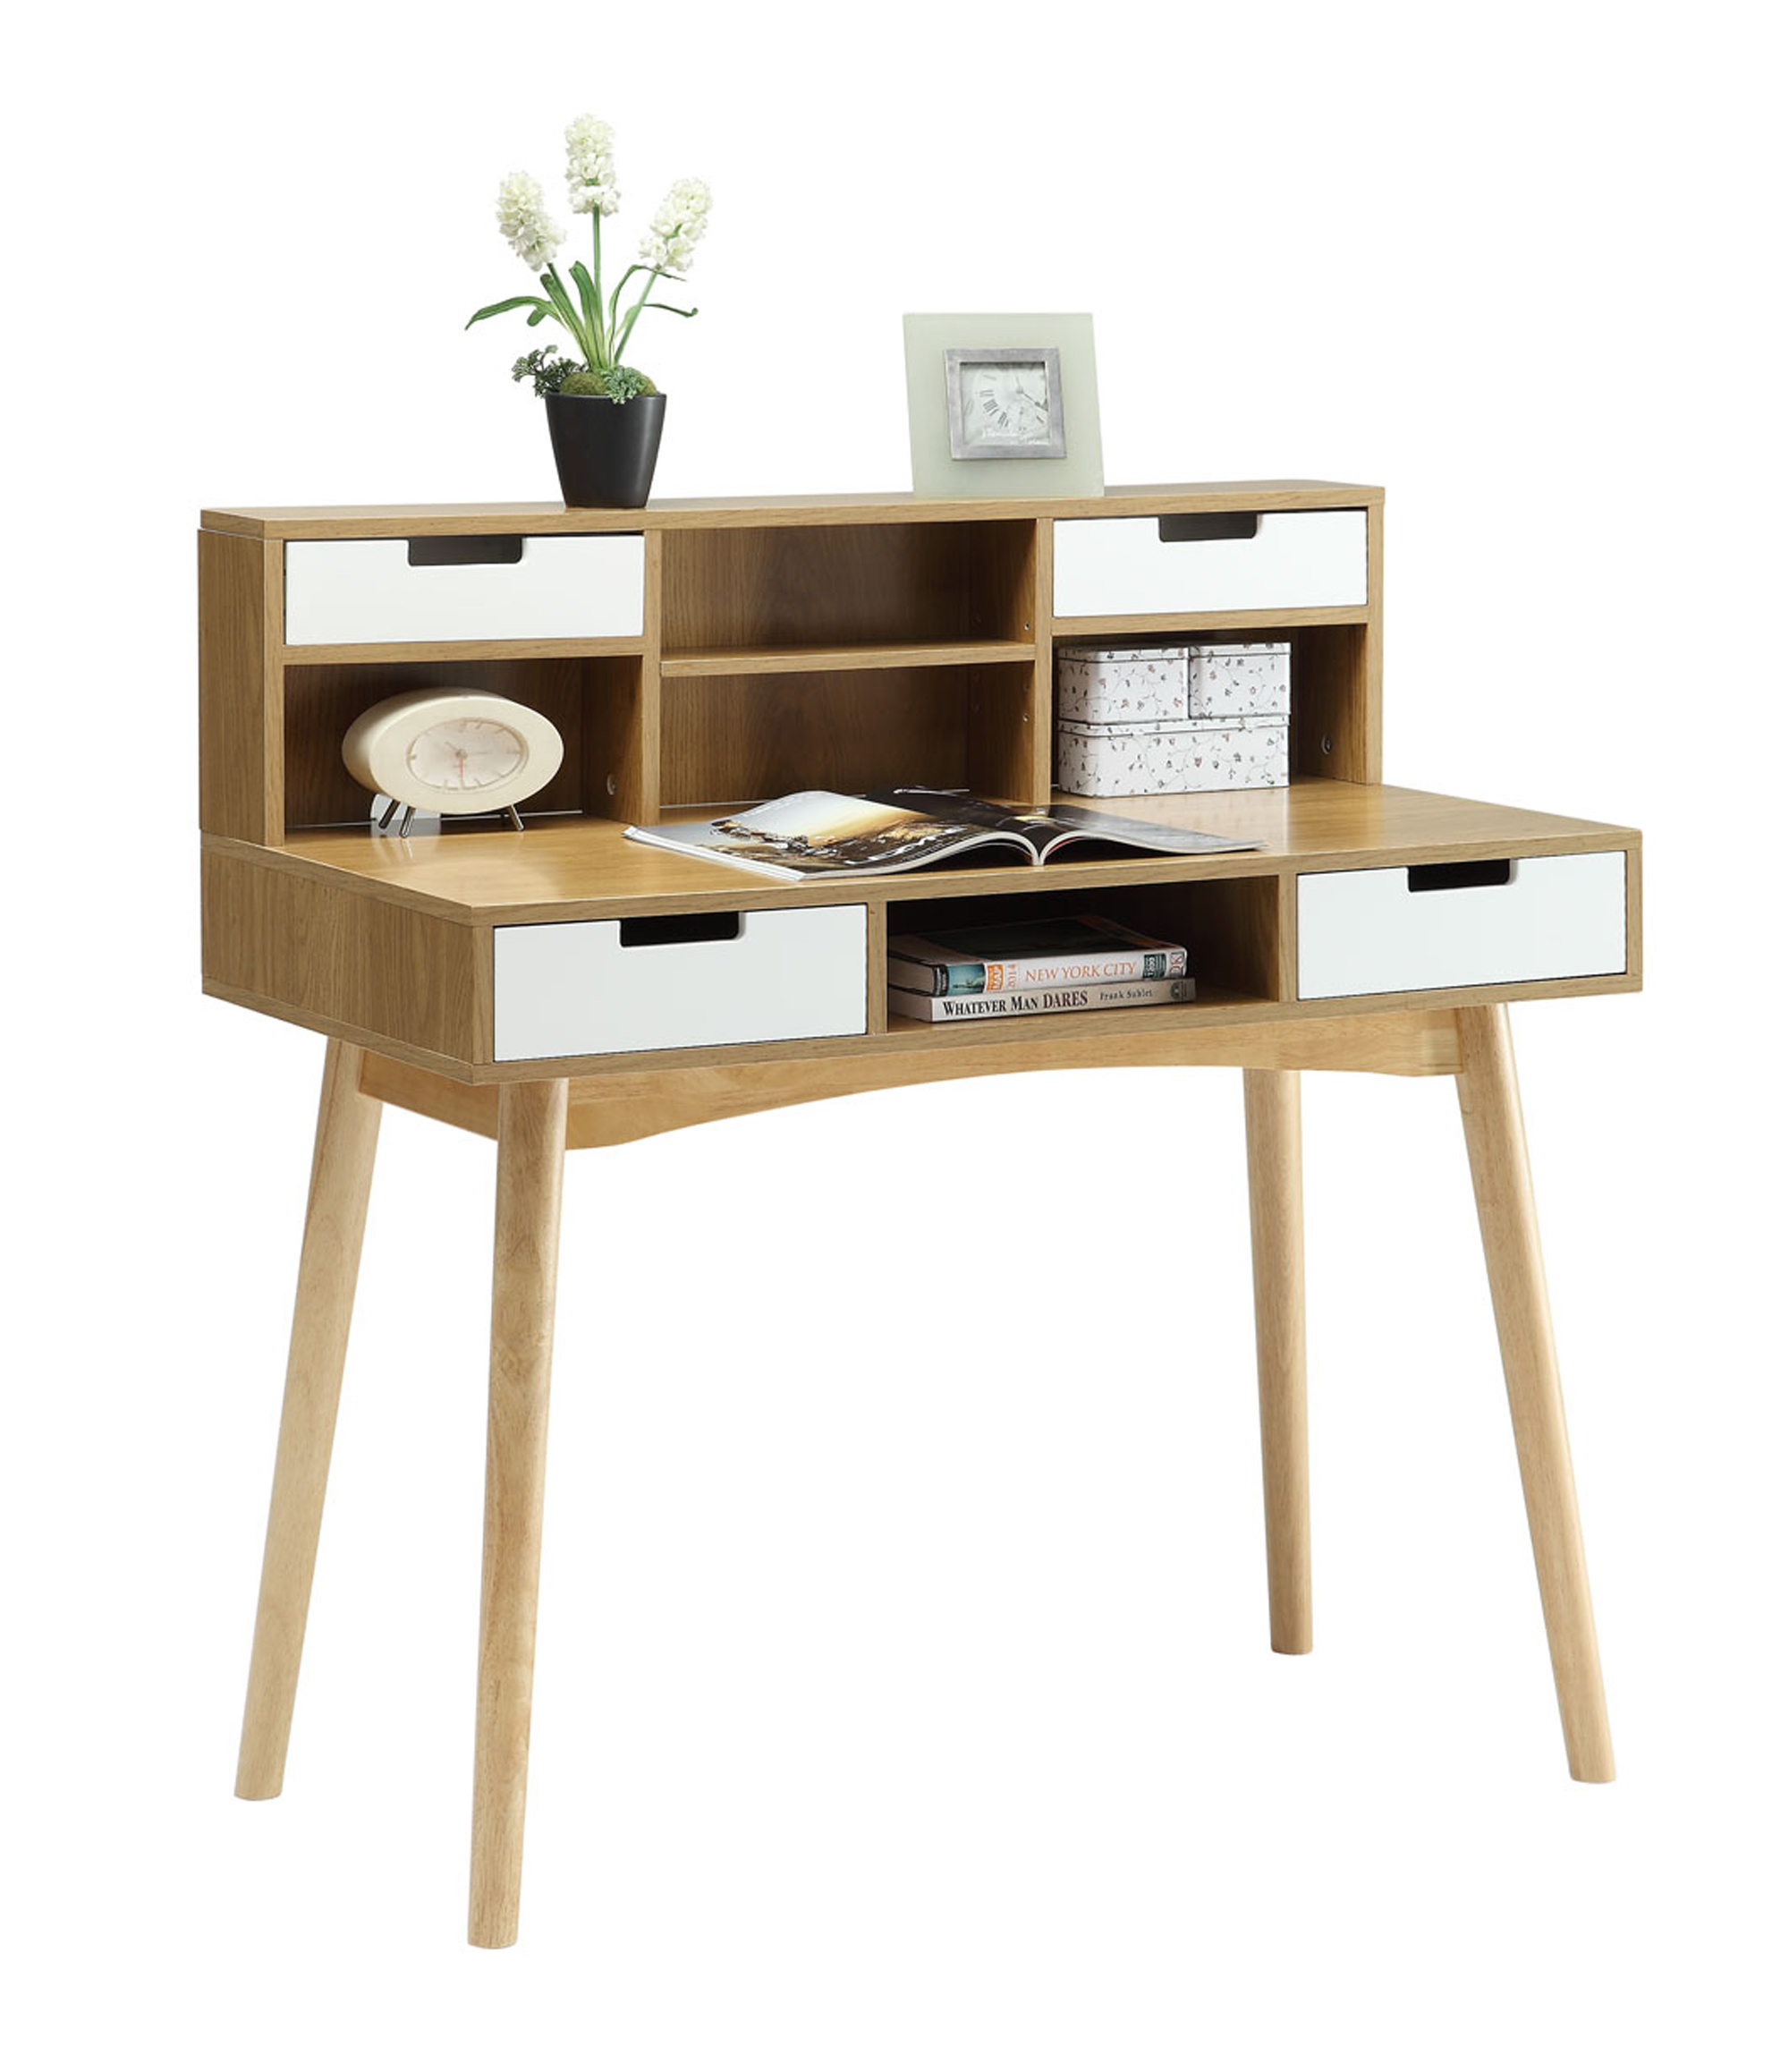 Convenience Concepts Oslo Deluxe Desk with Hutch - image 3 of 3